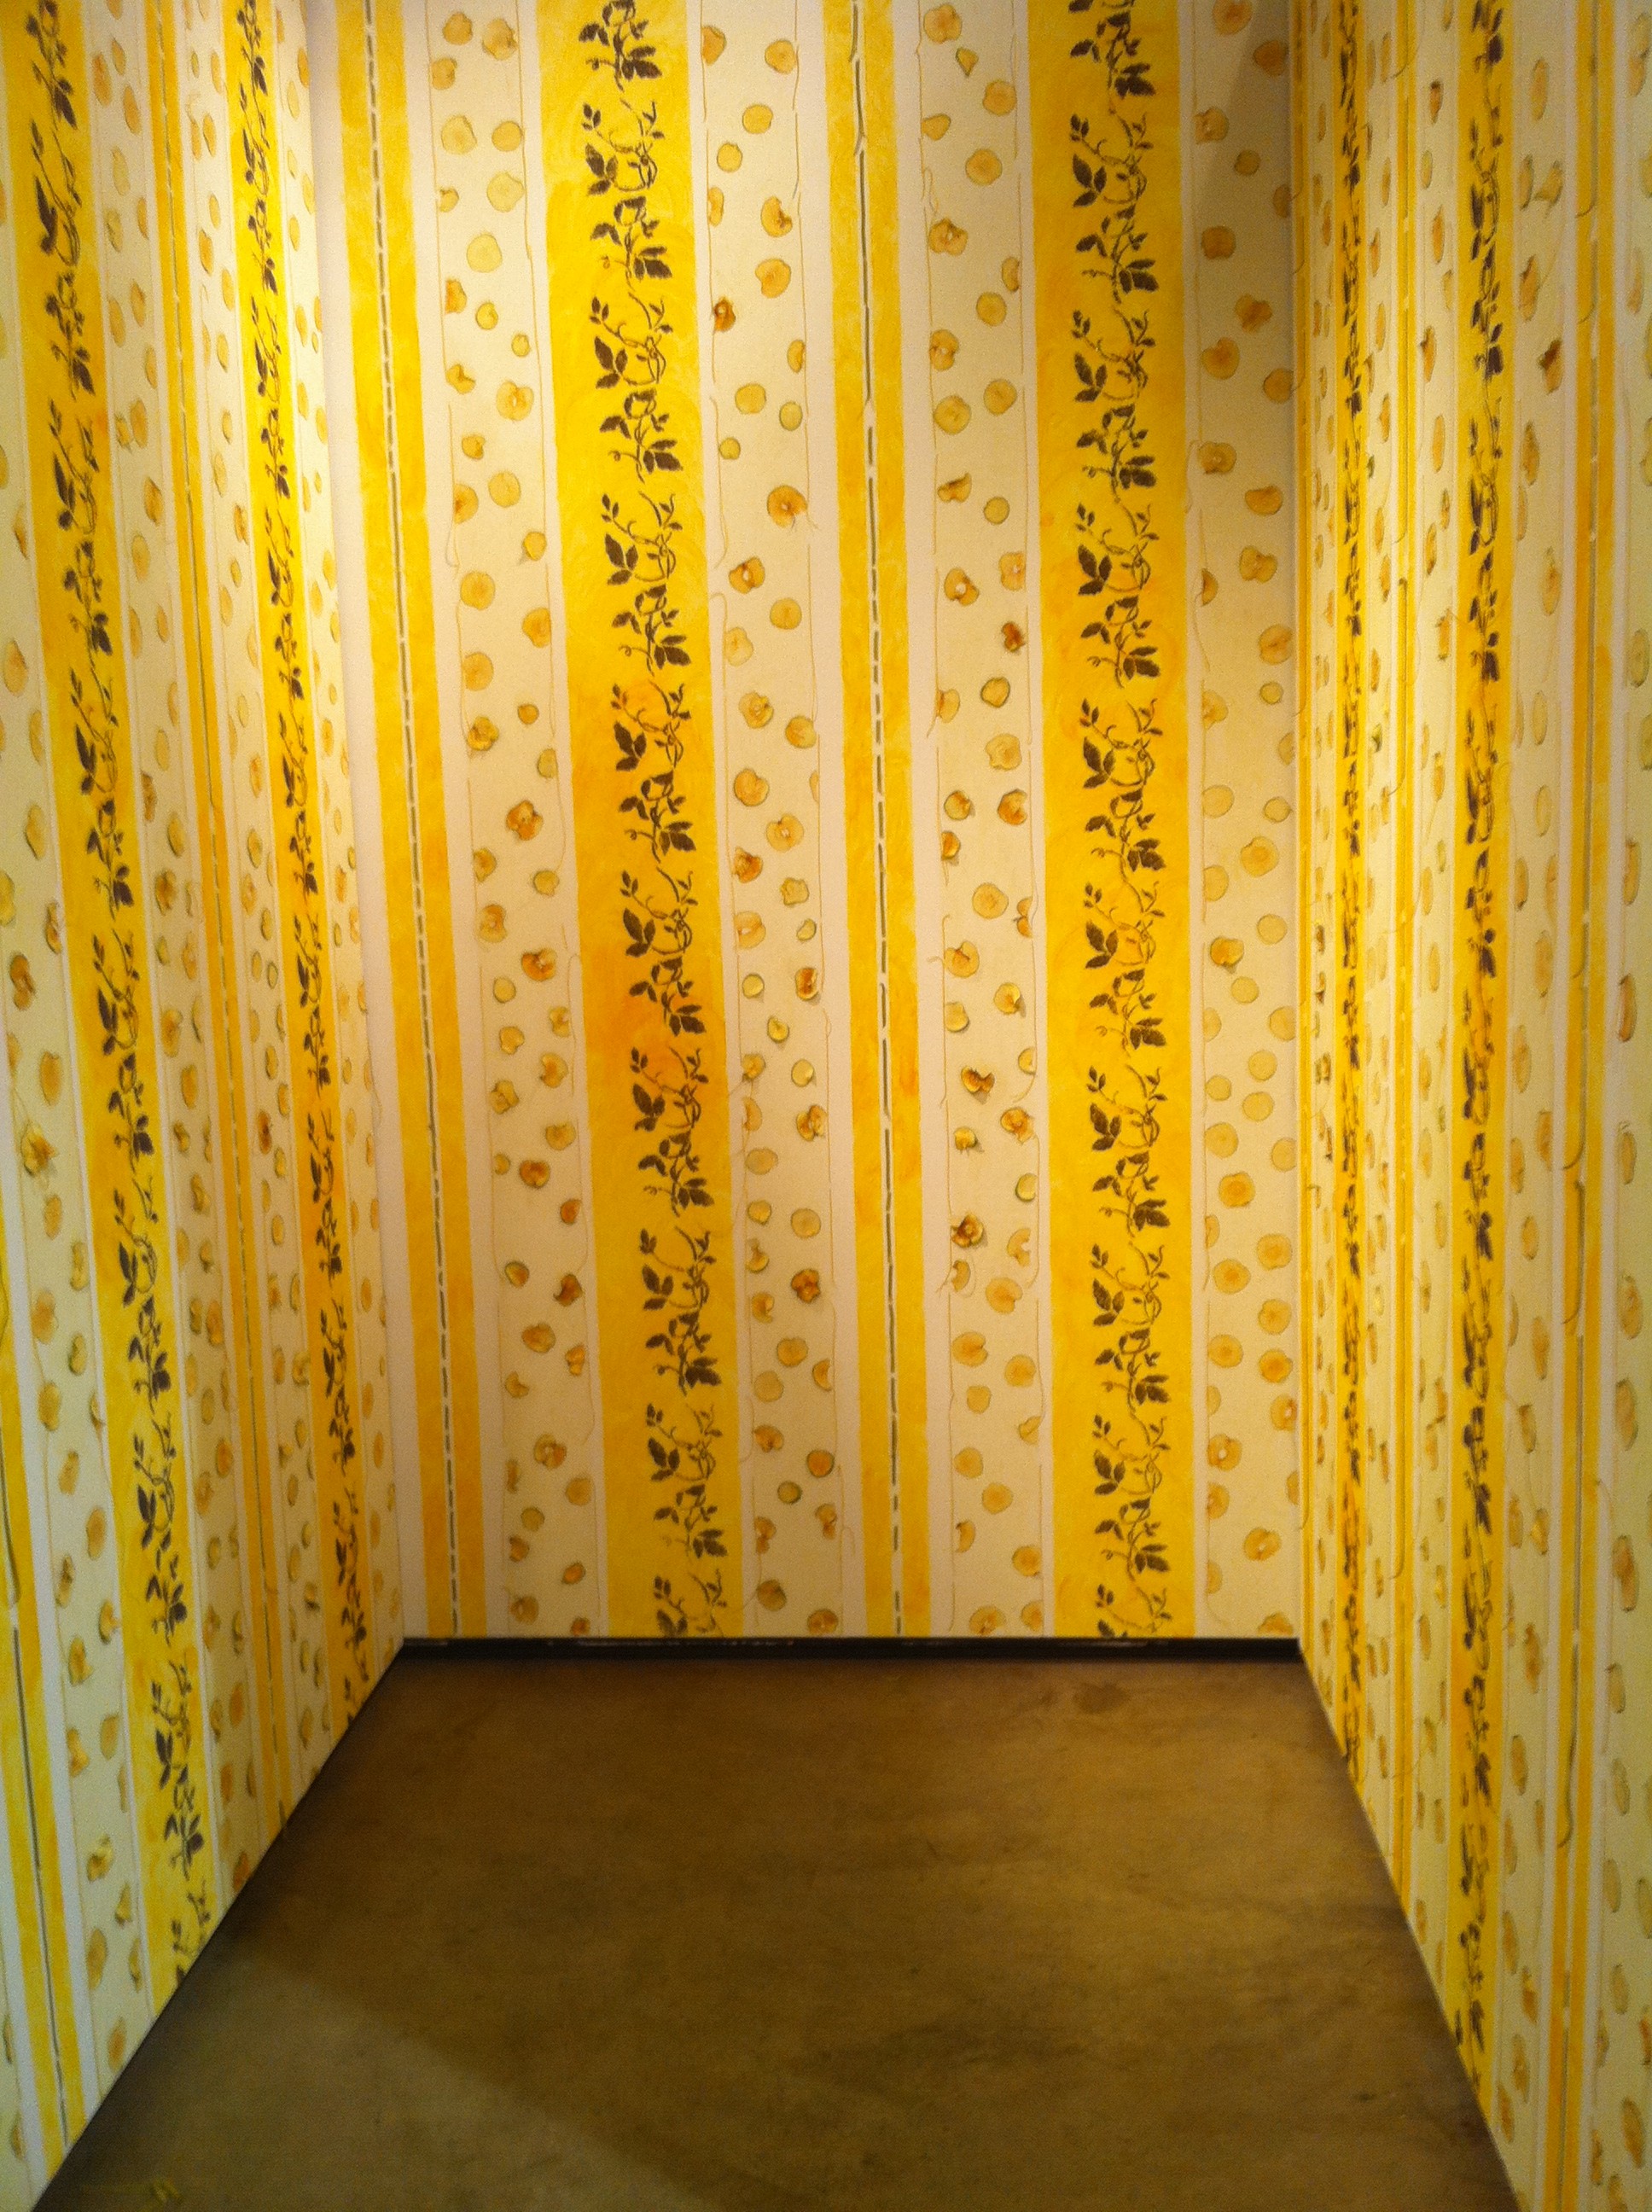 49+] Summary of the Yellow Wallpaper on